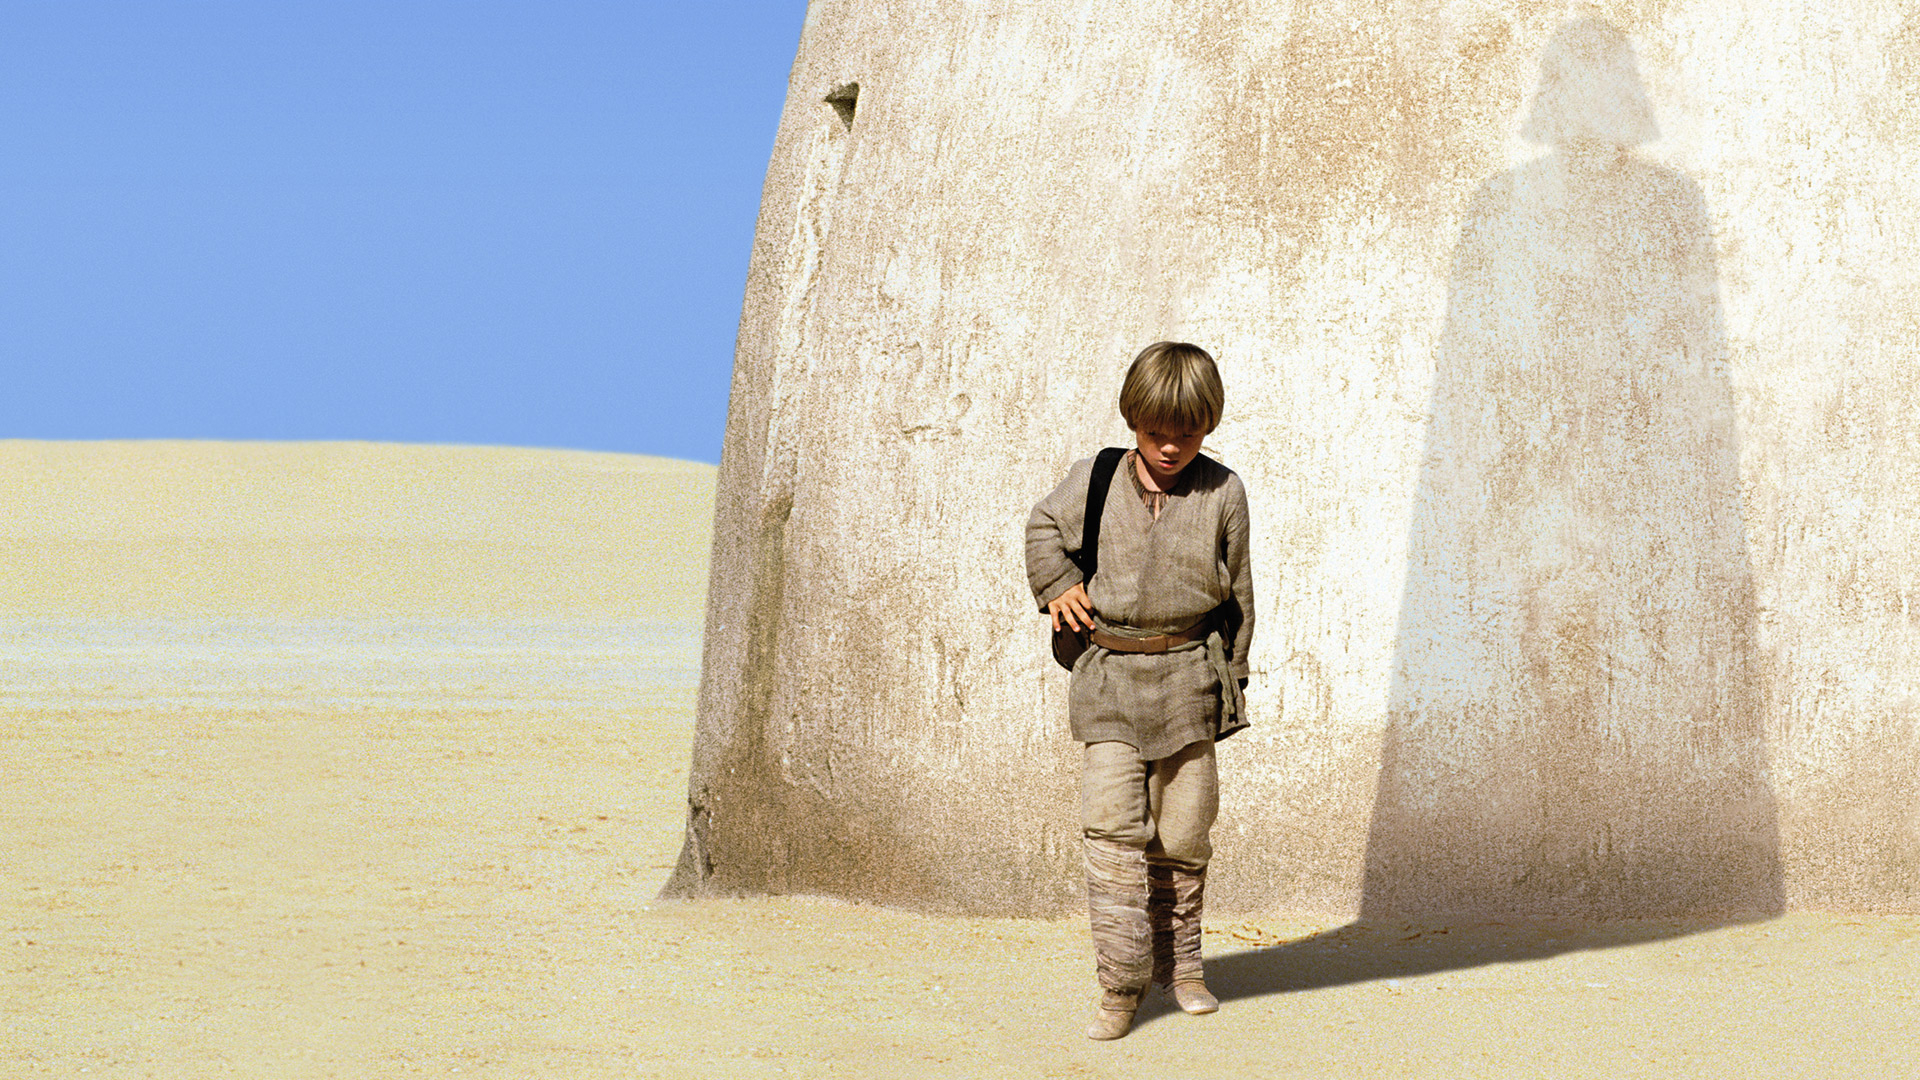 1920x1080 30+ Star Wars Episode I: The Phantom Menace HD Wallpapers and Backgrounds